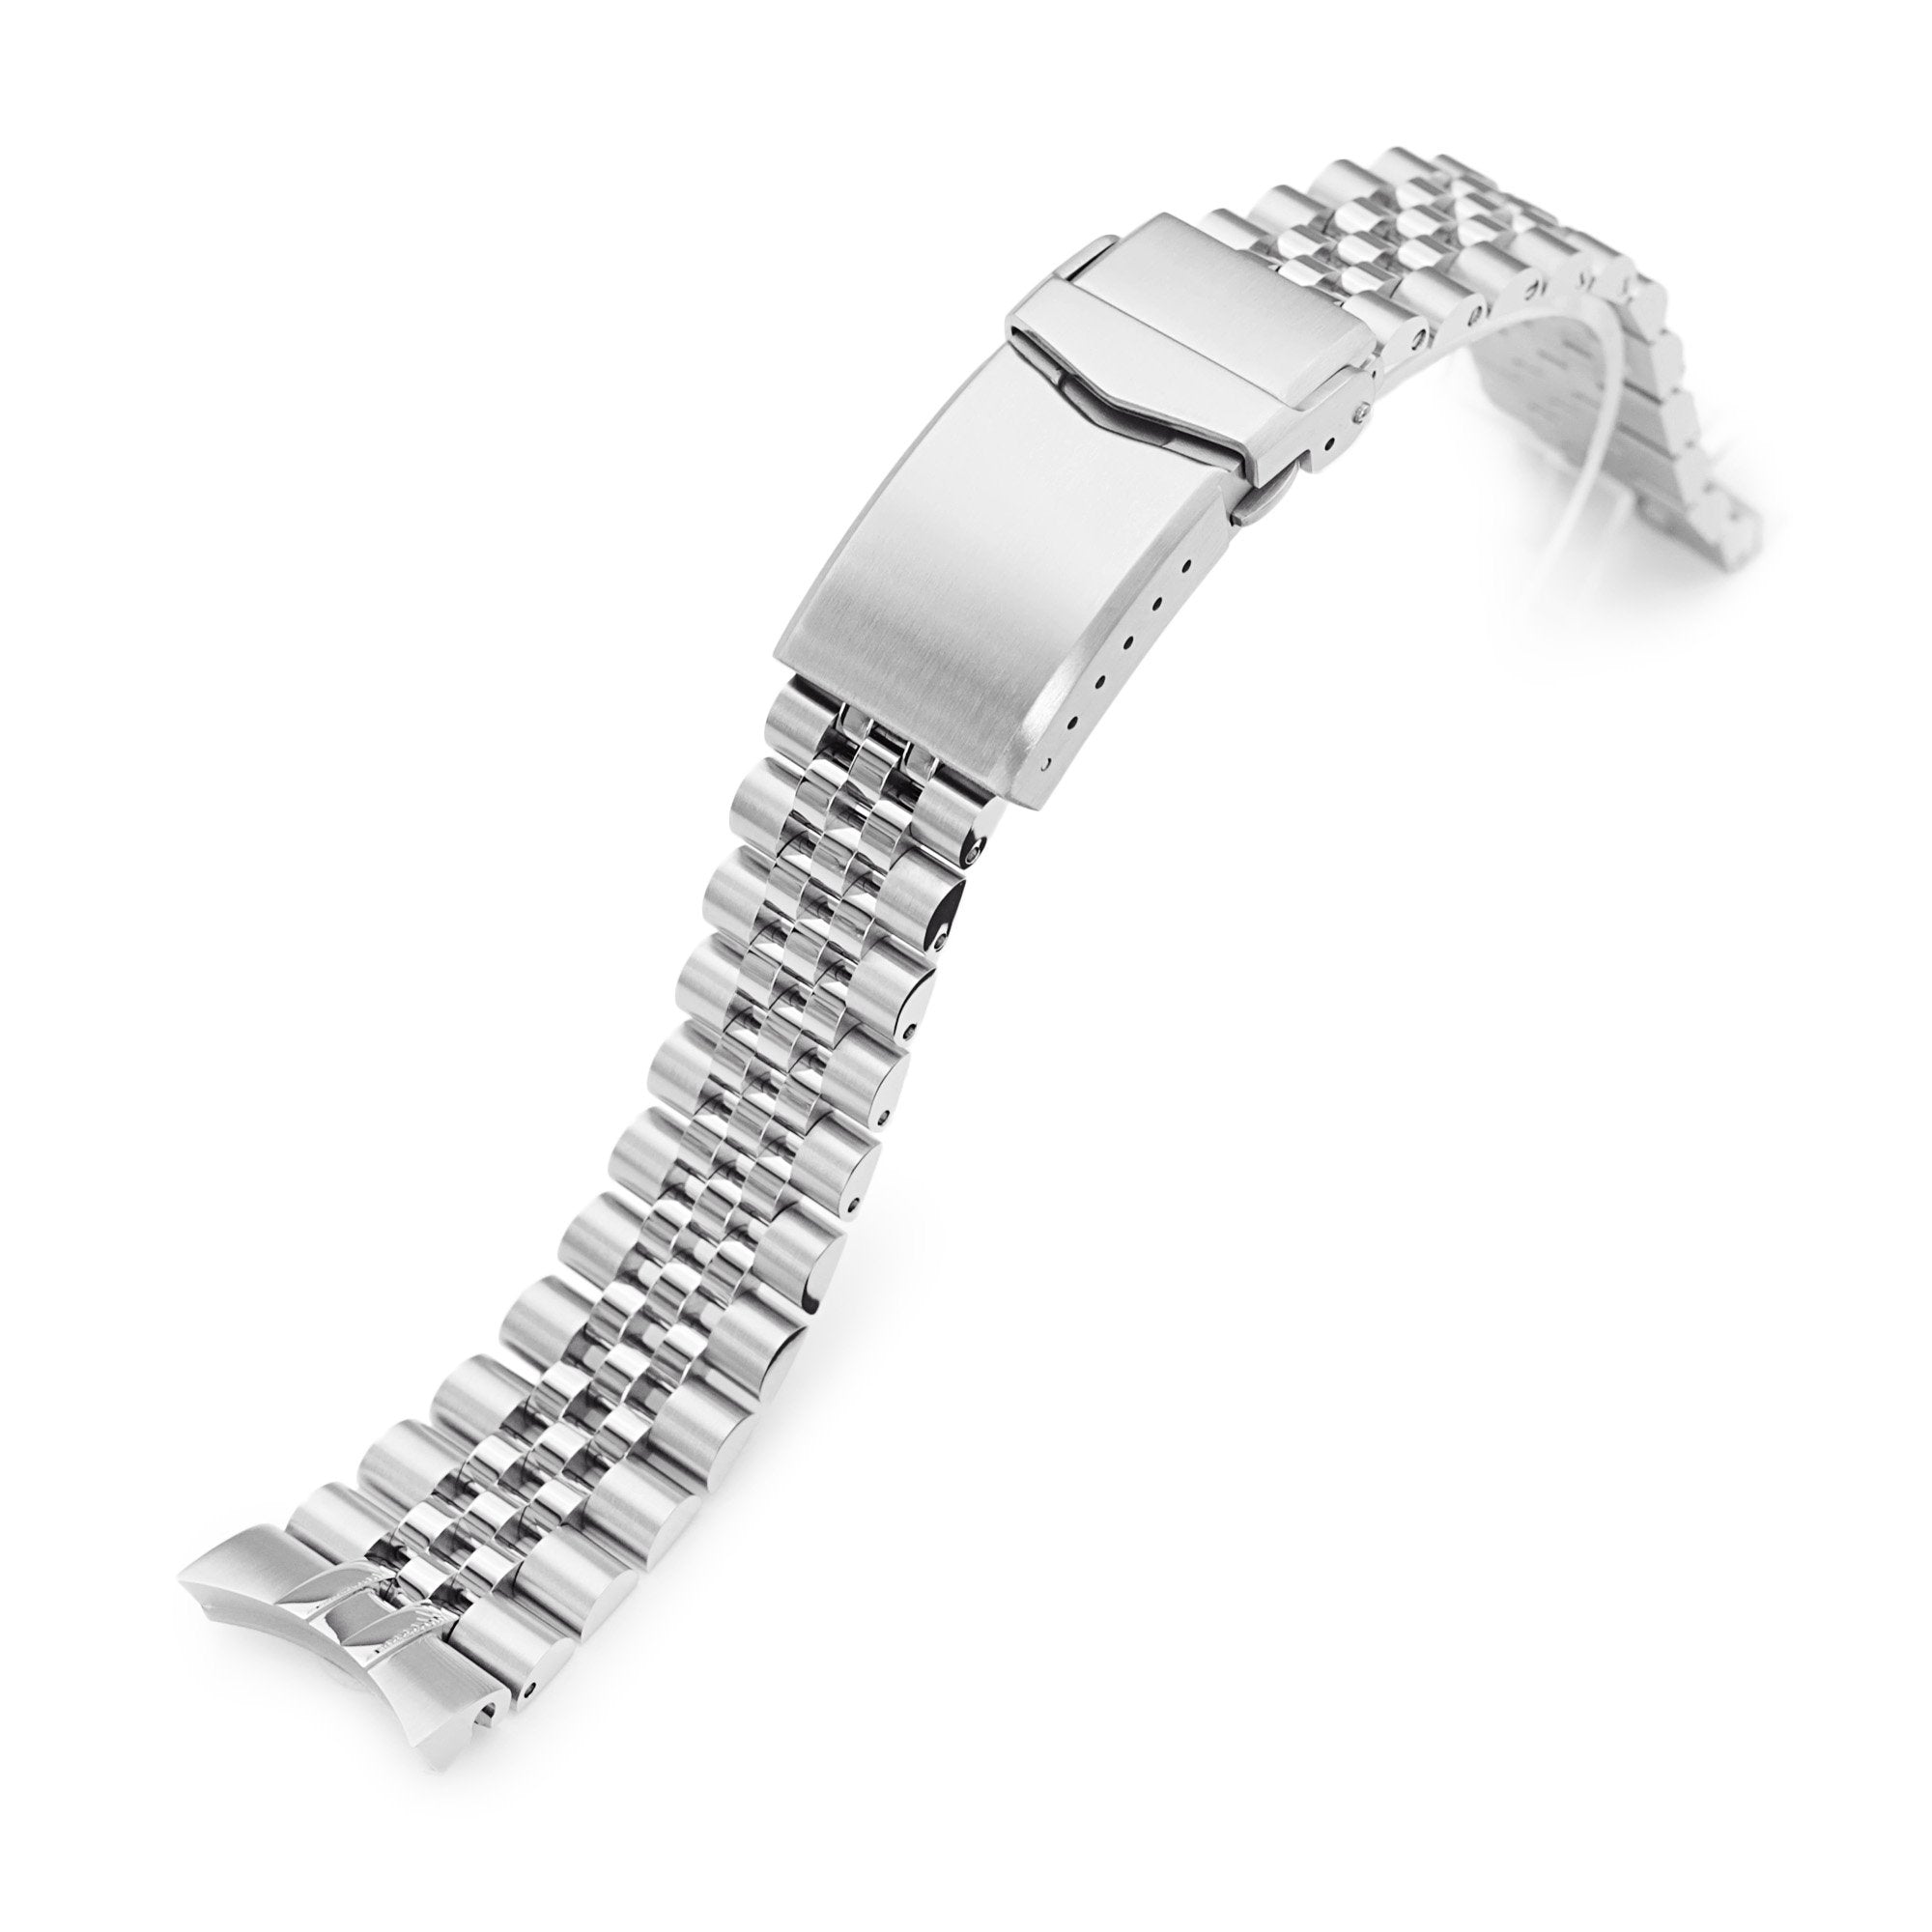 20mm Super-JUB II Watch Band for Seiko Alpinist SARB017, 316L Stainless Steel Brushed V-Clasp Strapcode Watch Bands